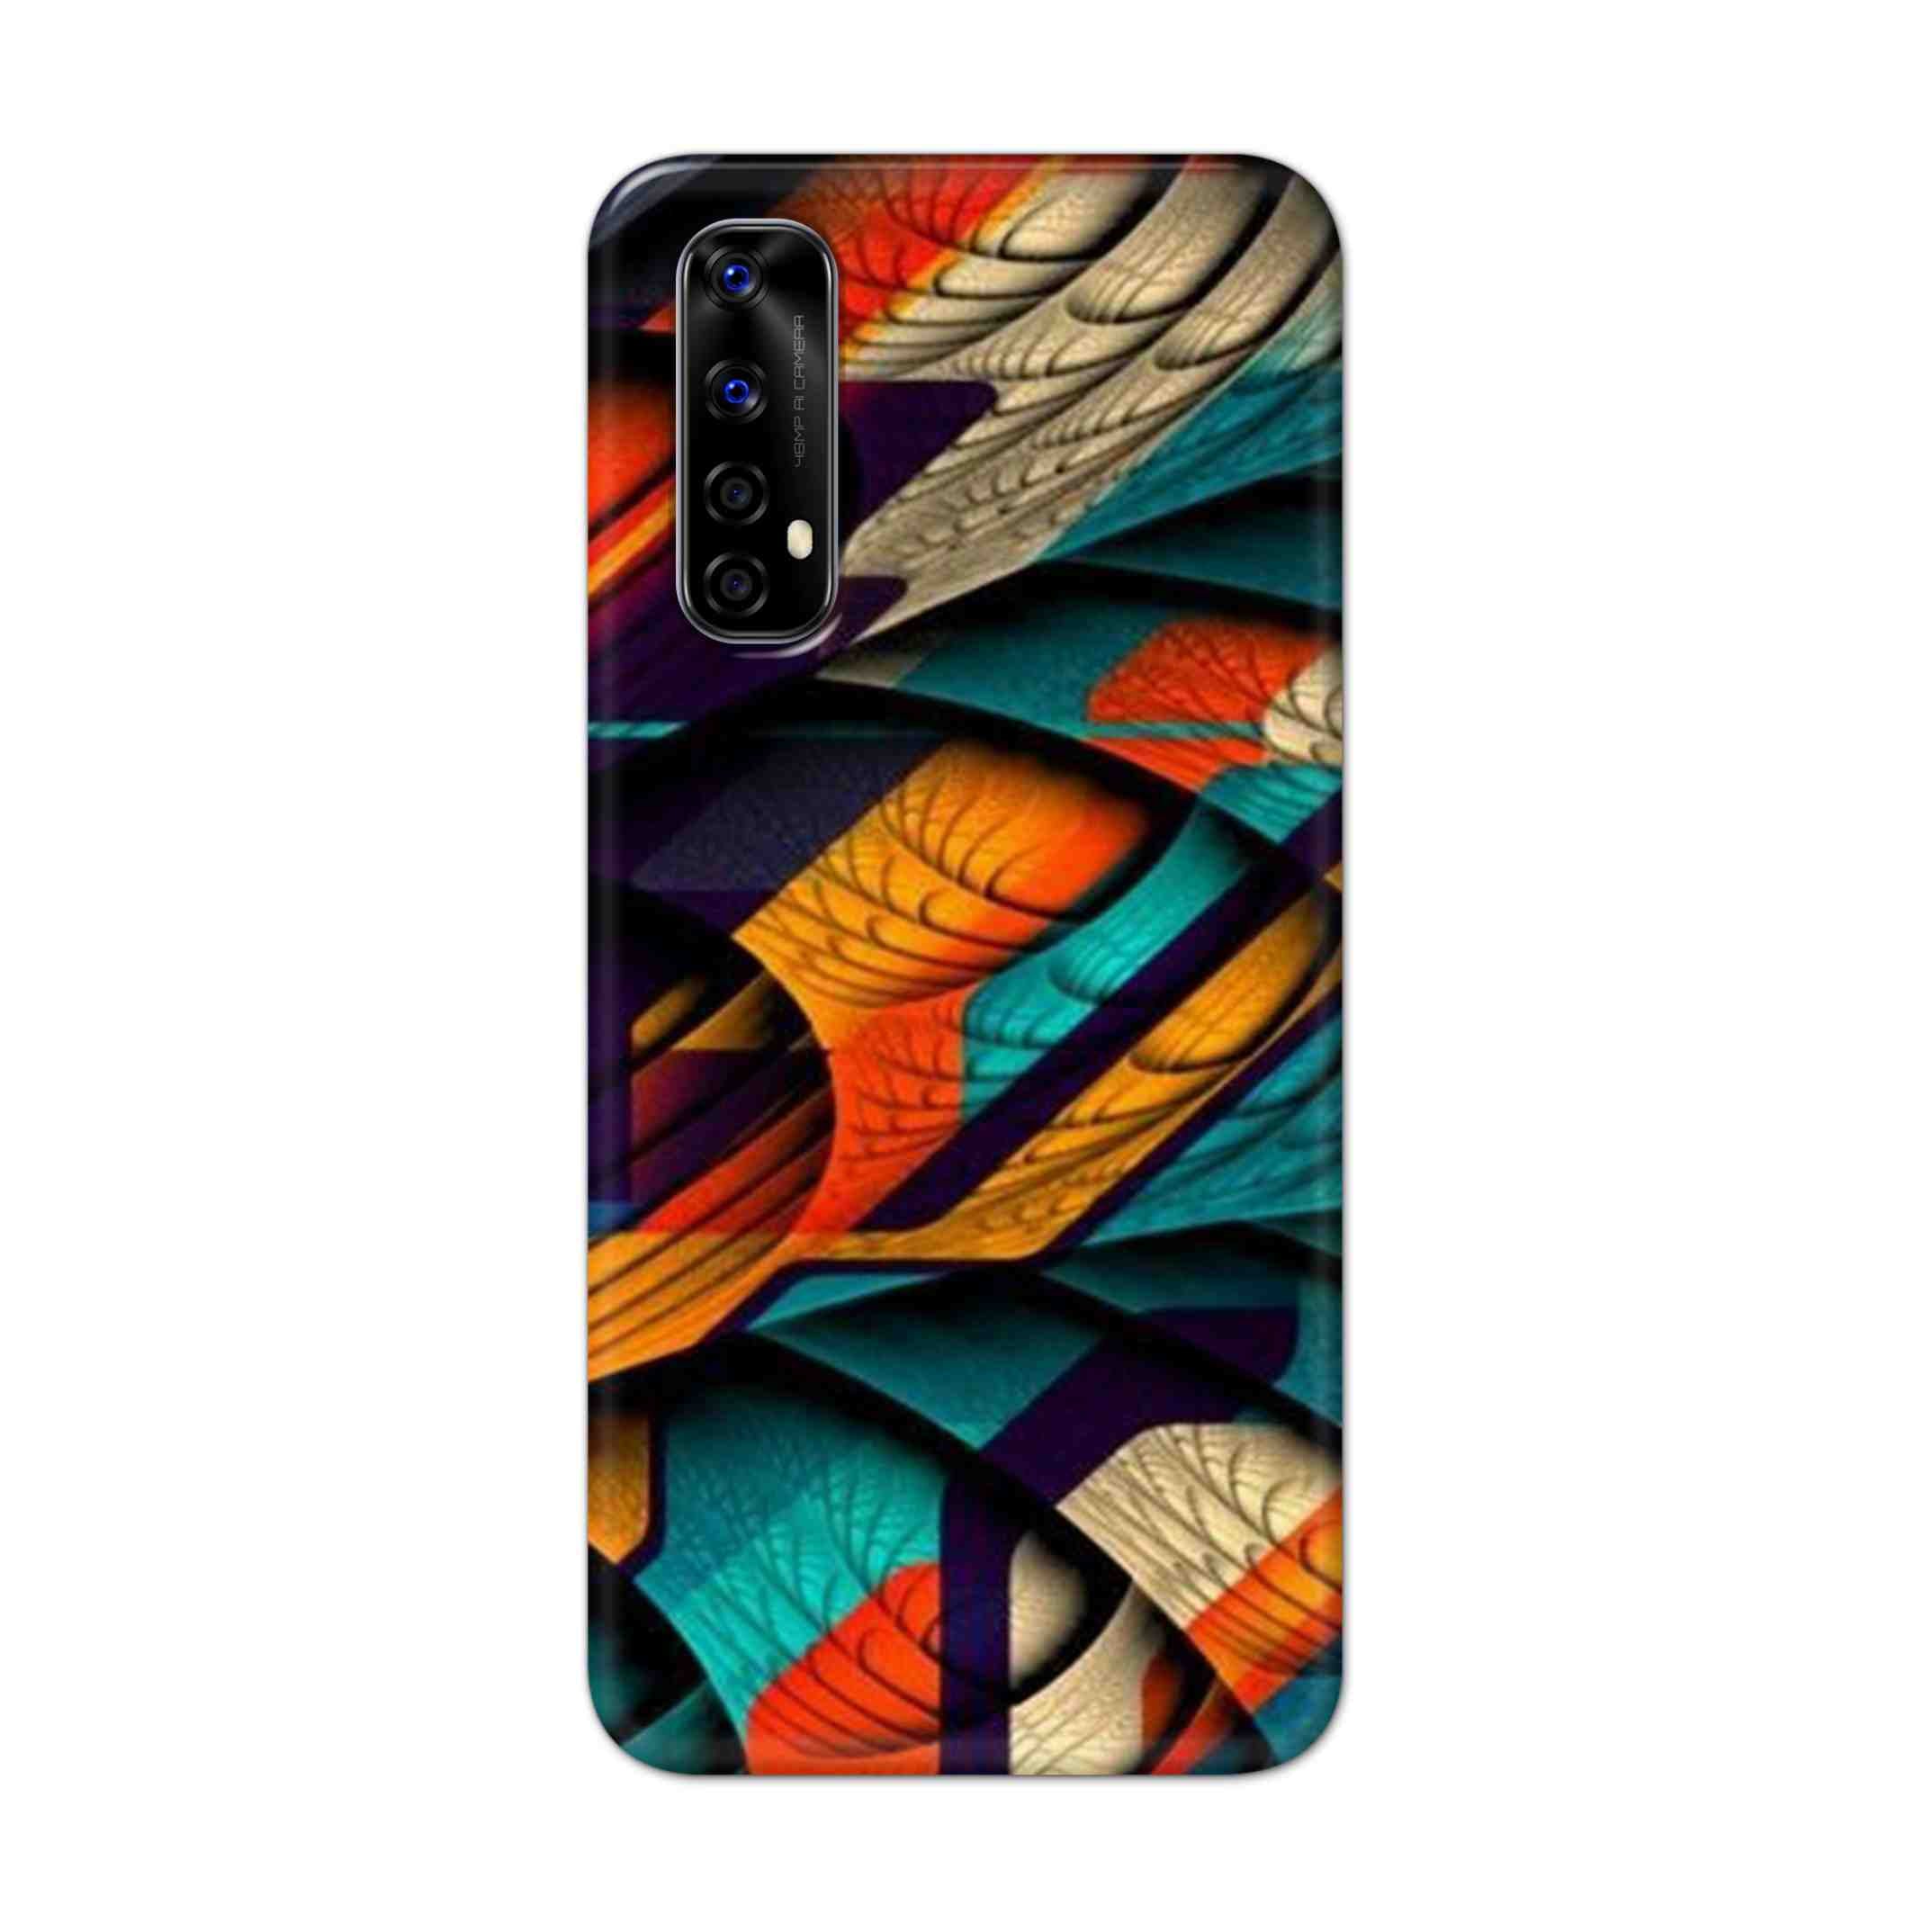 Buy Colour Abstract Hard Back Mobile Phone Case Cover For Realme Narzo 20 Pro Online